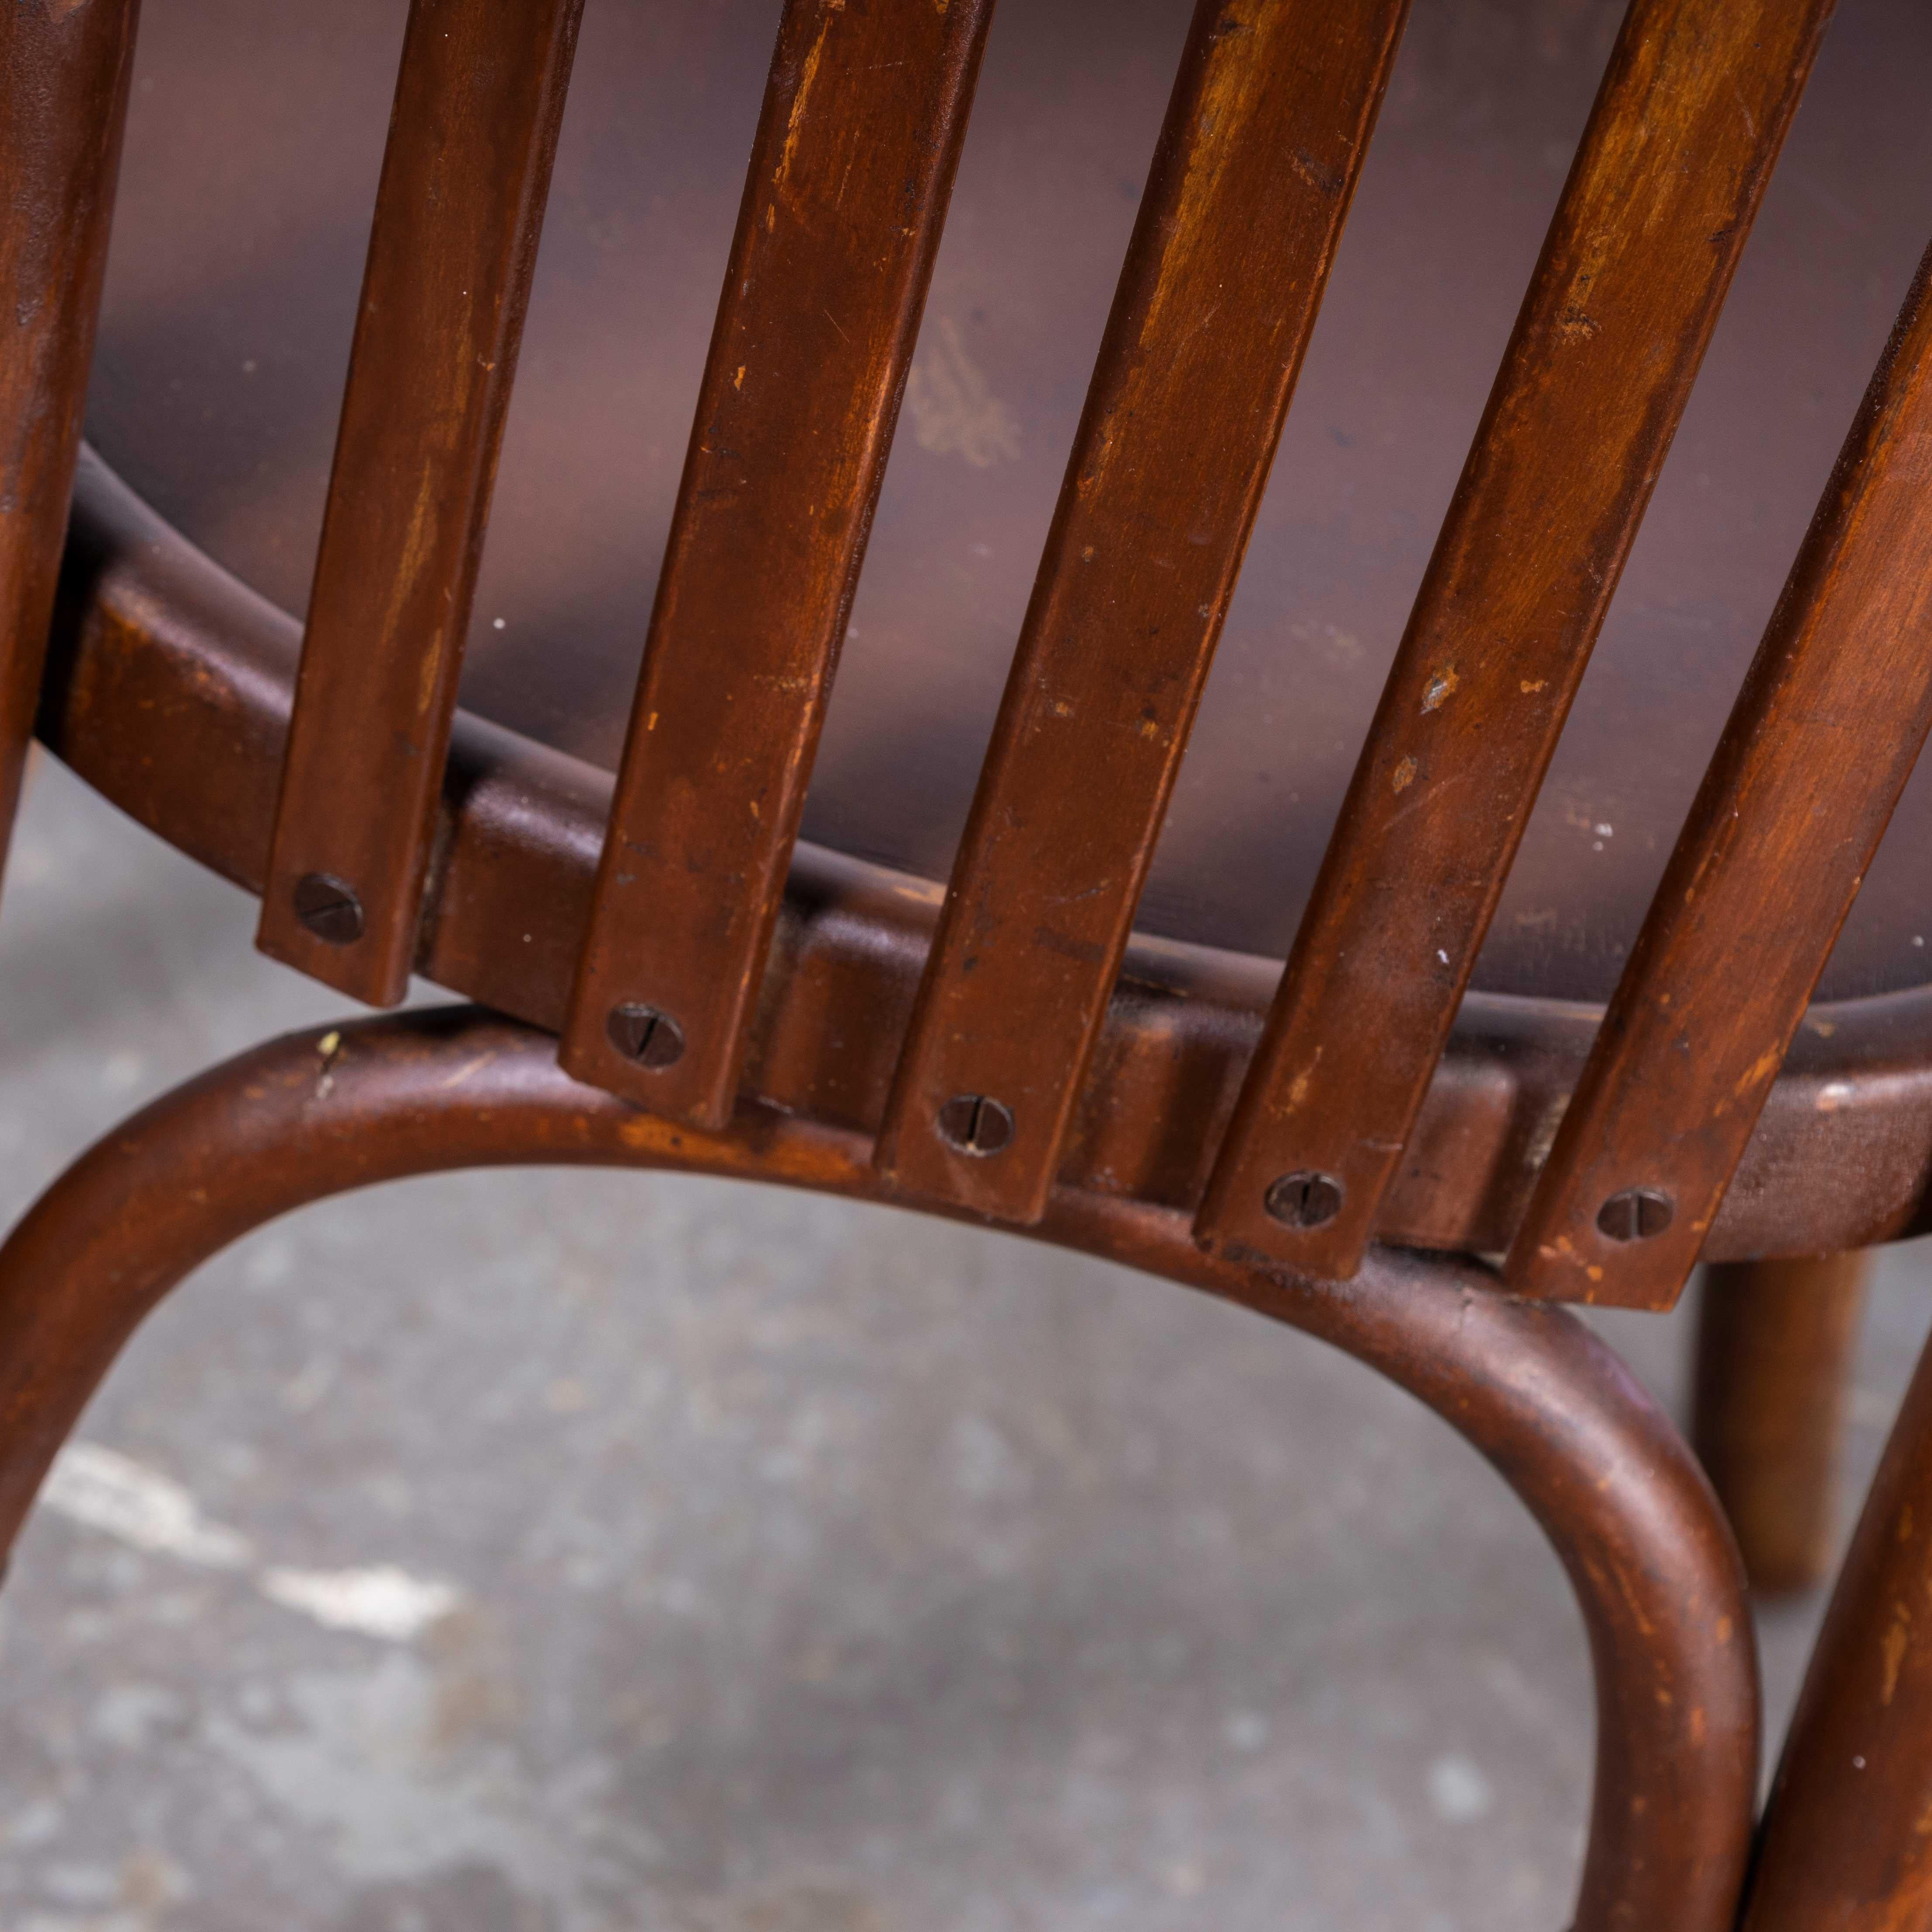 1960s Baumann Dark Oak Bistro Chairs – Set Of Five
1960s Baumann Dark Oak Bistro Chairs – Set Of Five. Classic bistro chairs made in France by the maker Baumann. Baumann chairs are relatively off the radar and are starting to attract the attention